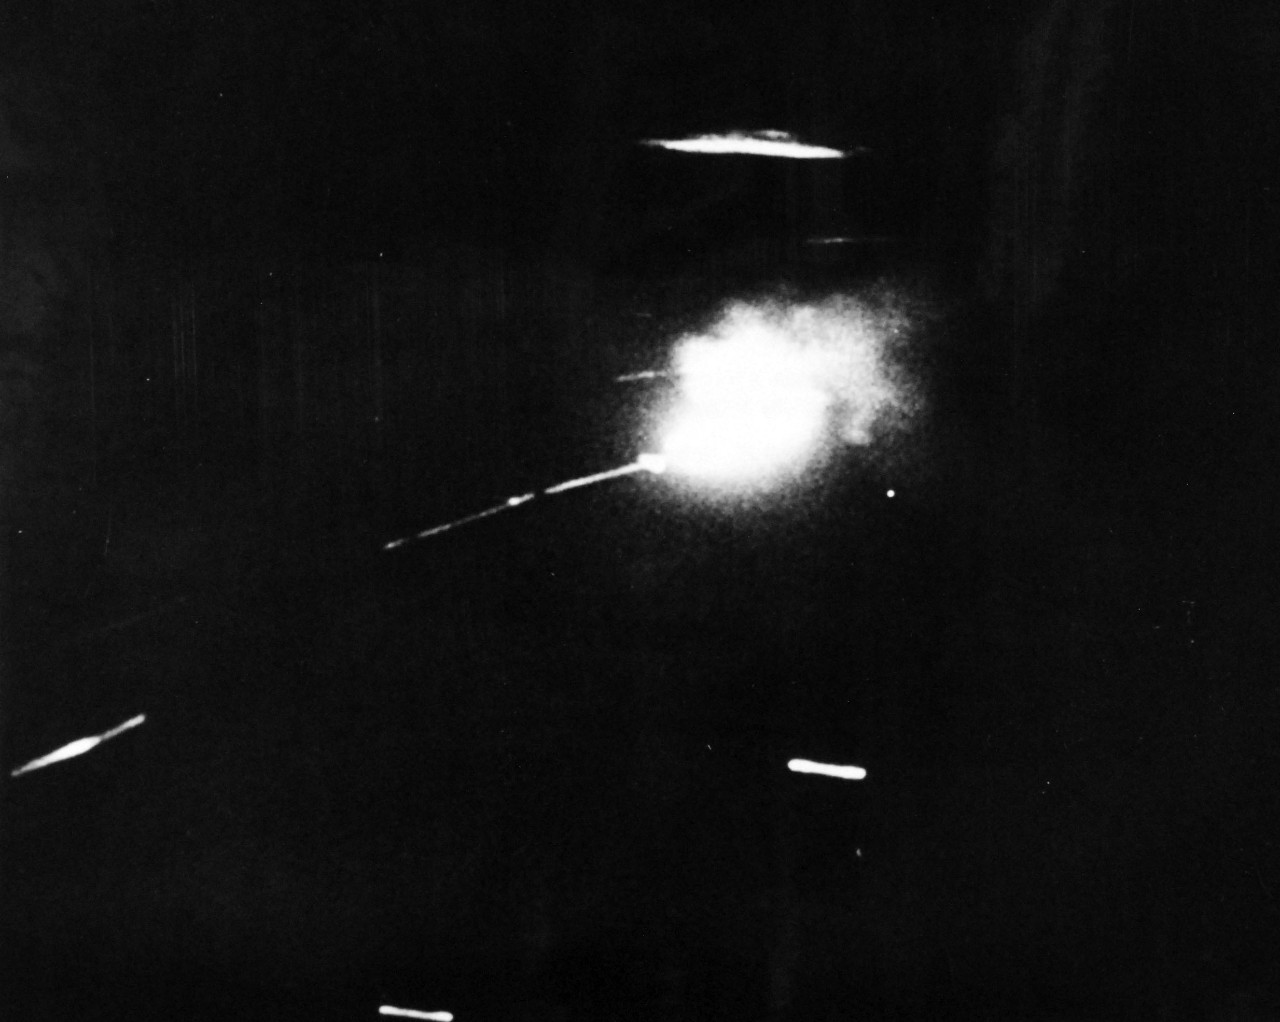 80-G-49874: Japanese Kamikaze Attack, July 1945. Stills from the U.S. Navy, Marines and Coast Guard film, “The Fleet That Come To Stay.”  Shown:  Hit and set aflame by U.S. Navy anti-aircraft fire, a Japanese Kamikaze plane becomes a ball of fire as it descends toward the sea off Okinawa.    Received July 19, 1945.   Official U.S. Navy photograph, now in the collections of the National Archives.  